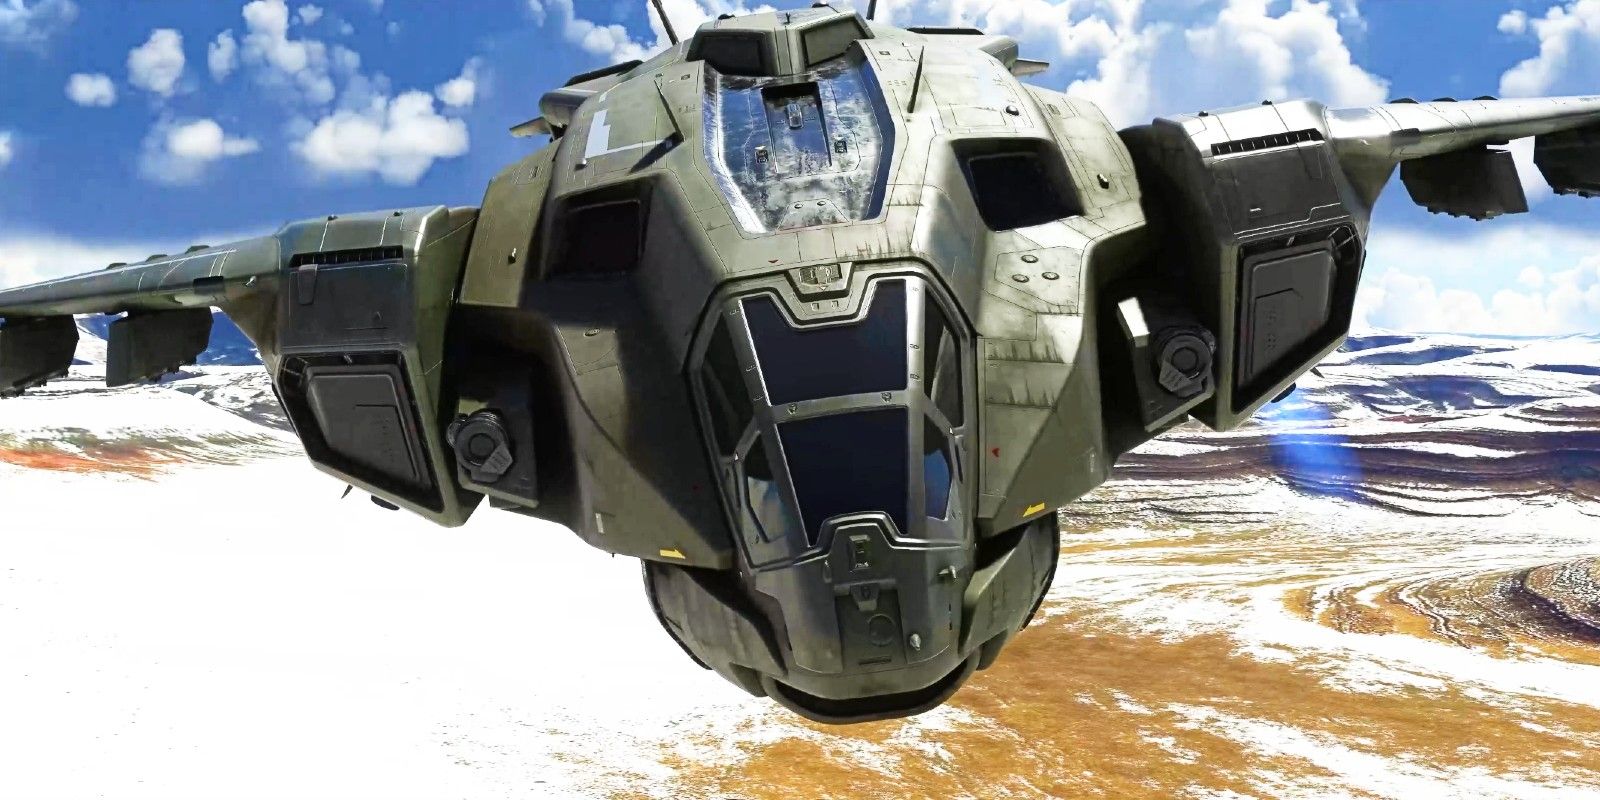 Image depicting the Halo Infinite Pelican aircraft, available for download in Microsoft Flight Simulator.